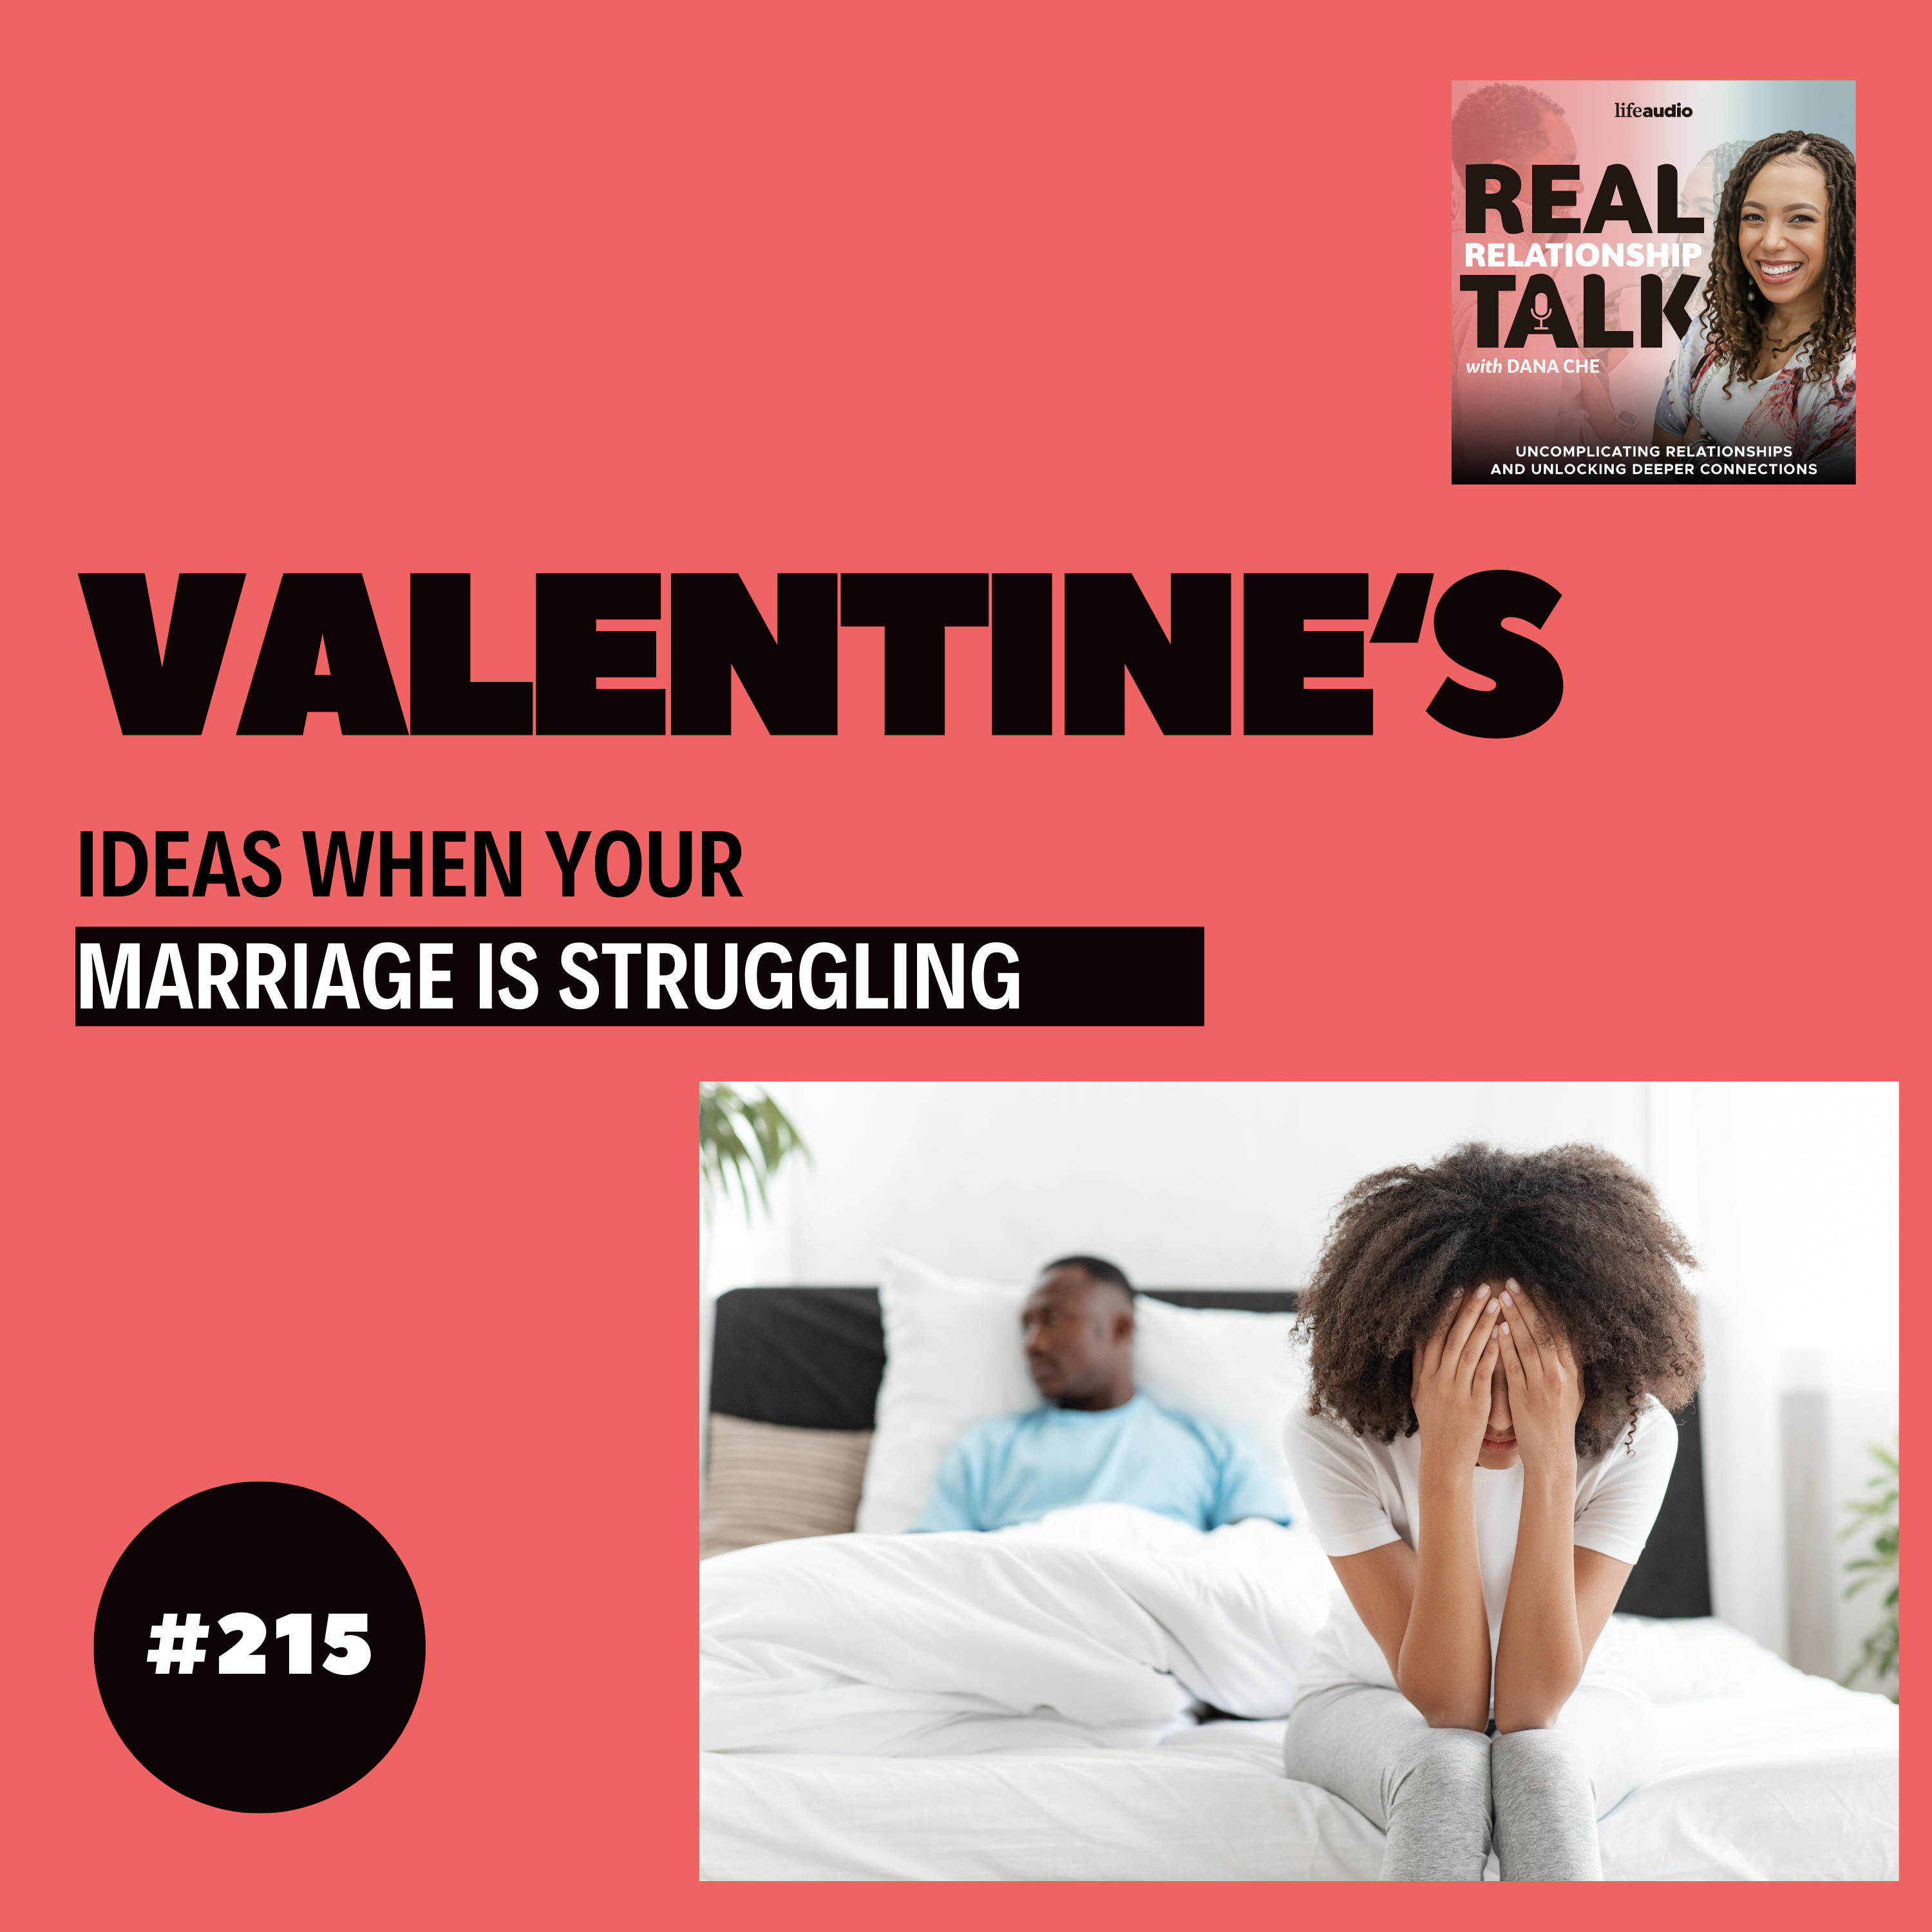 Valentine’s Day Solutions for Struggling Marriages: 5 Tips to Reconnection